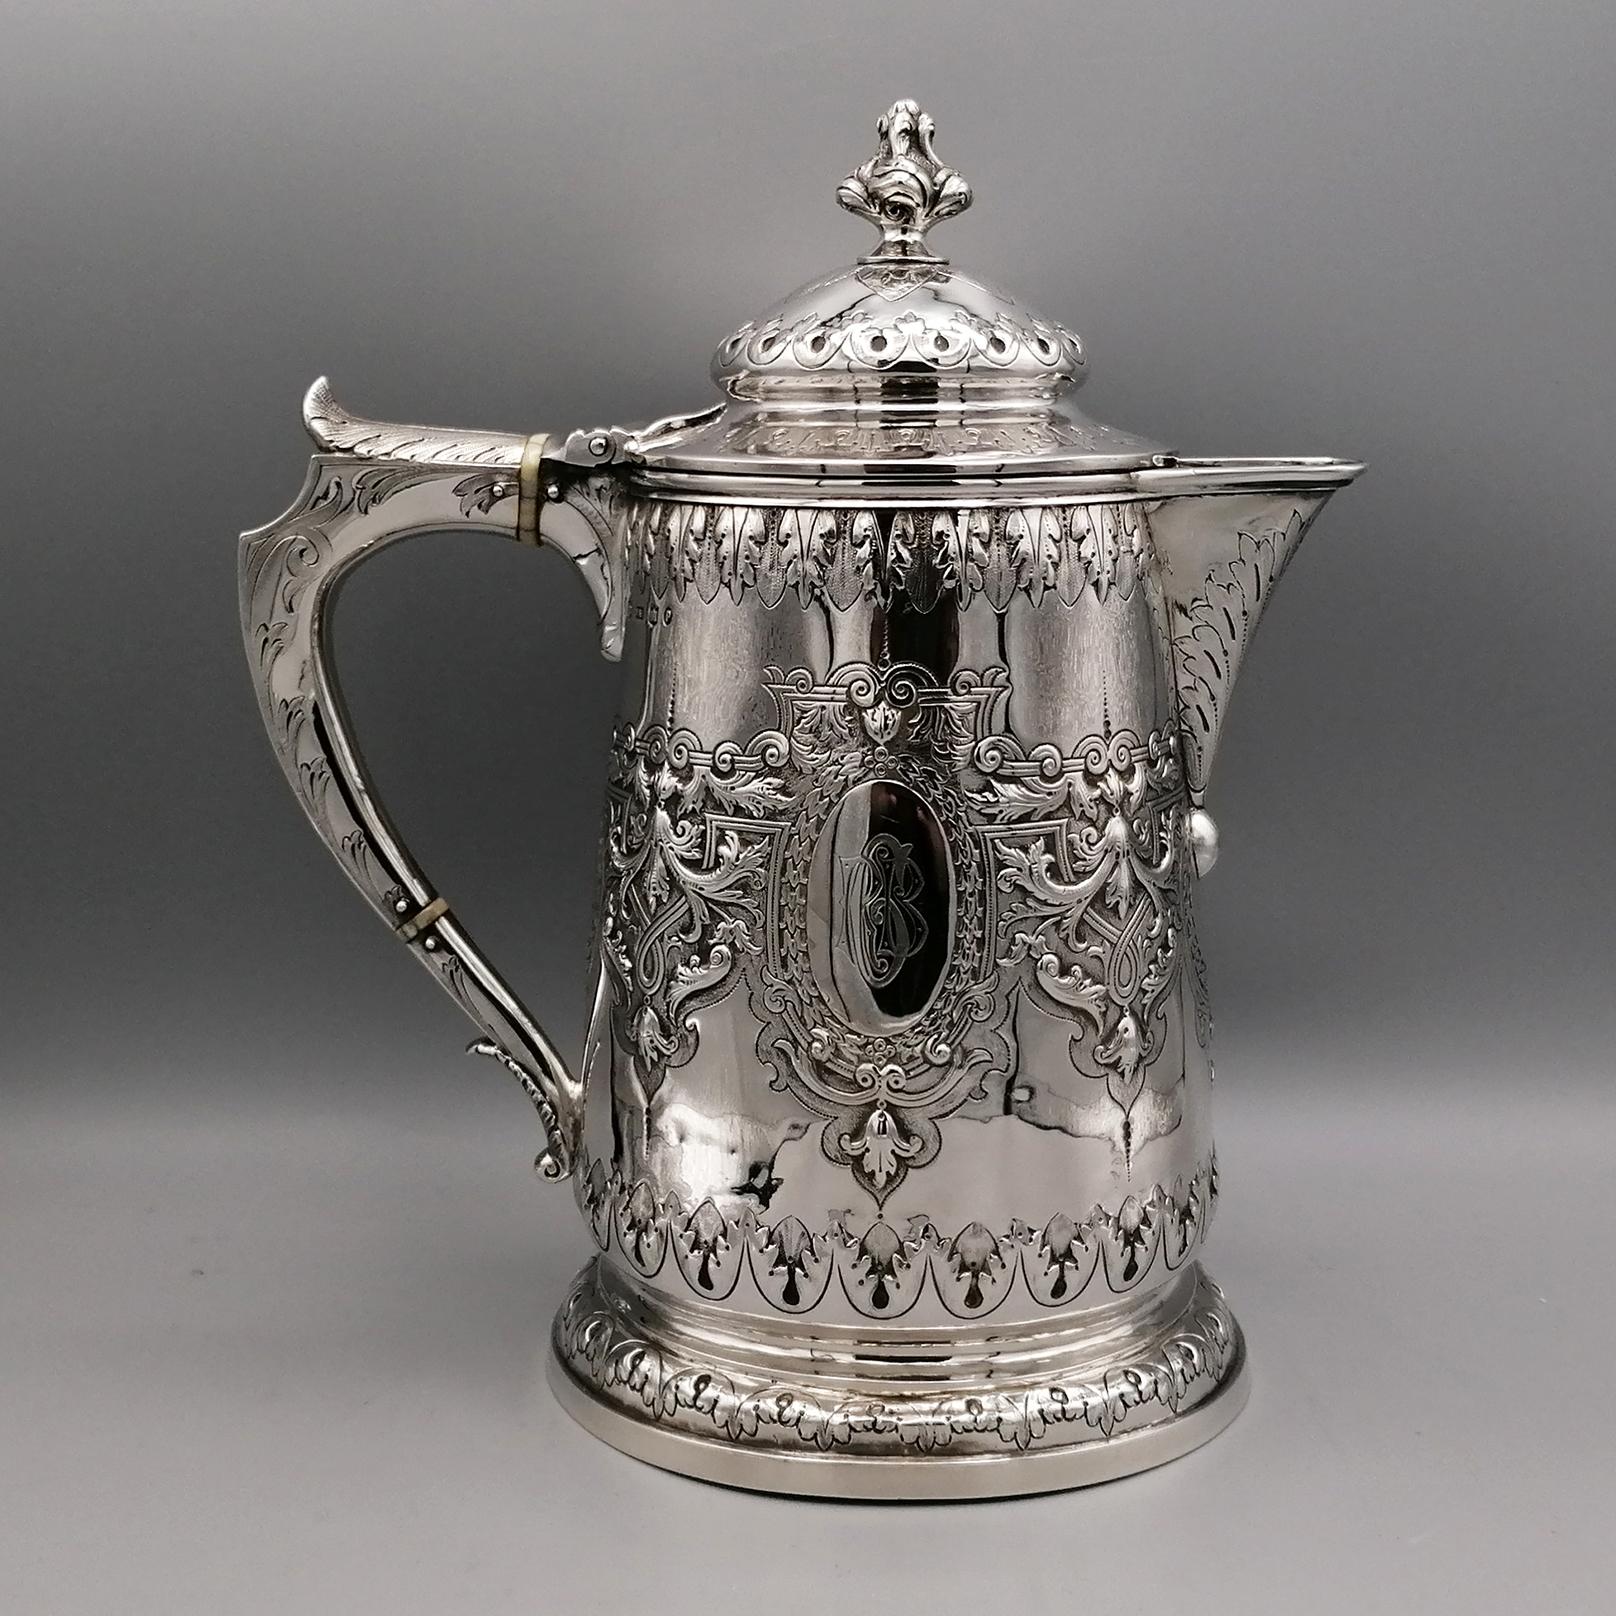 This magnificent antique Victorian English sterling silver pitcher has a simple conical shape on a widened circular foot.
The body of the jug is embellished with a magnificent engraved foliate decoration, incorporating two large cartouches.
The